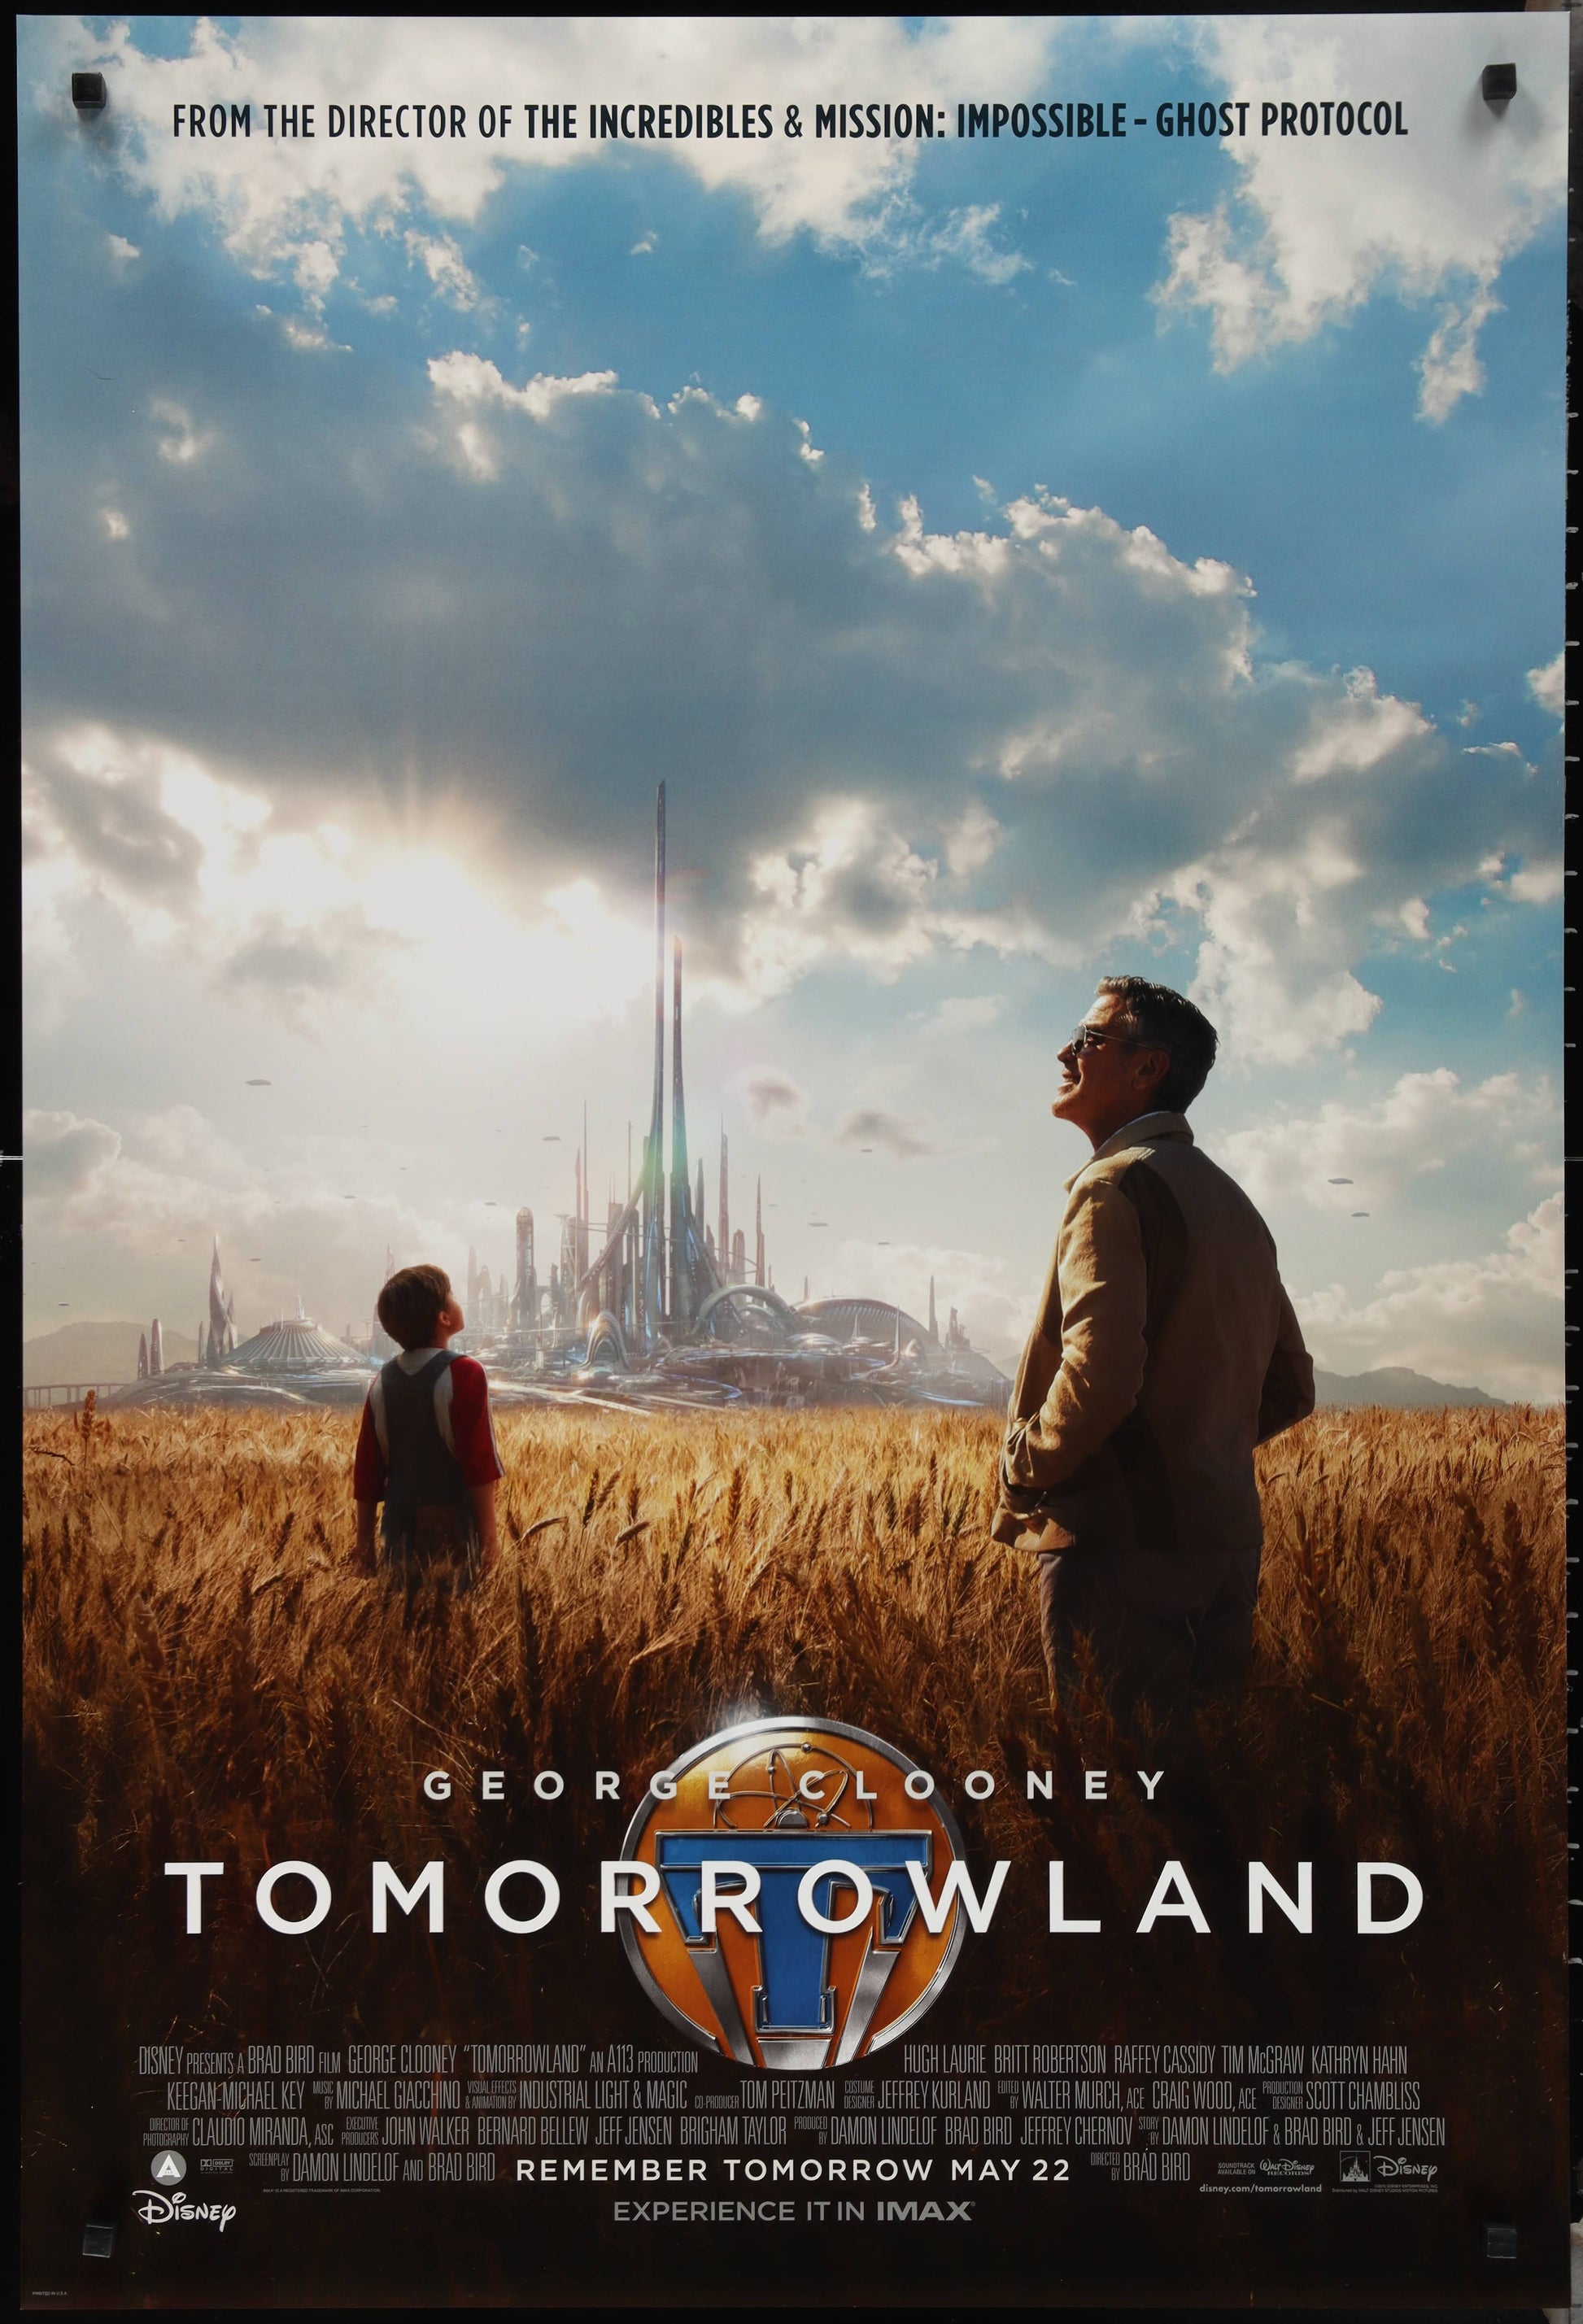 Tomorrowland US One Sheet (2015) - ORIGINAL RELEASE - posterpalace.com